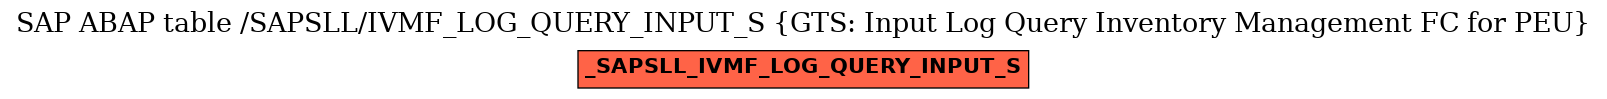 E-R Diagram for table /SAPSLL/IVMF_LOG_QUERY_INPUT_S (GTS: Input Log Query Inventory Management FC for PEU)